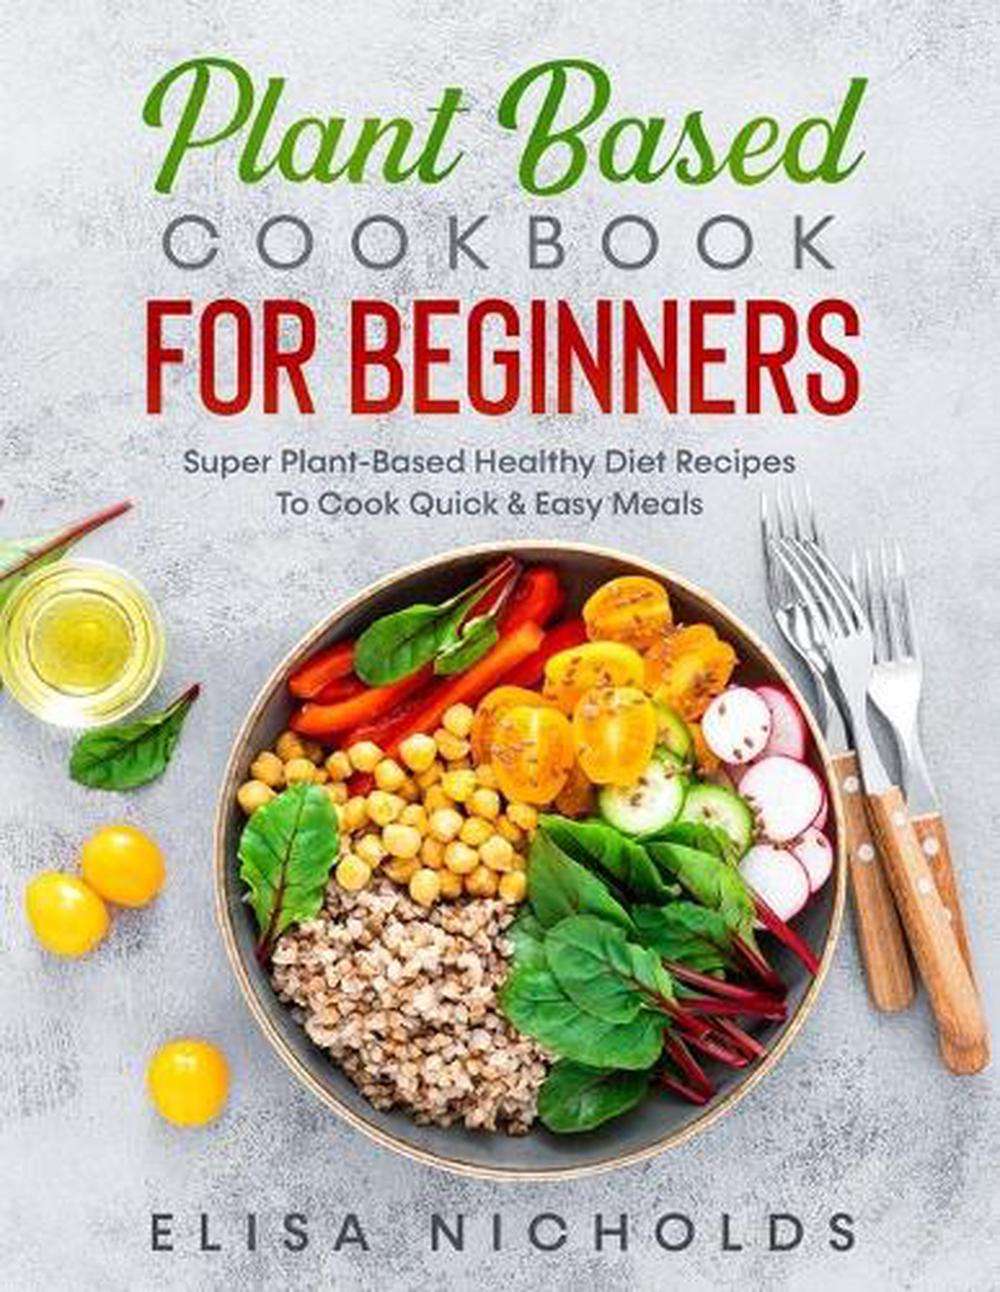 Plant Based Cookbook for Beginners by Elisa Nicholds ...